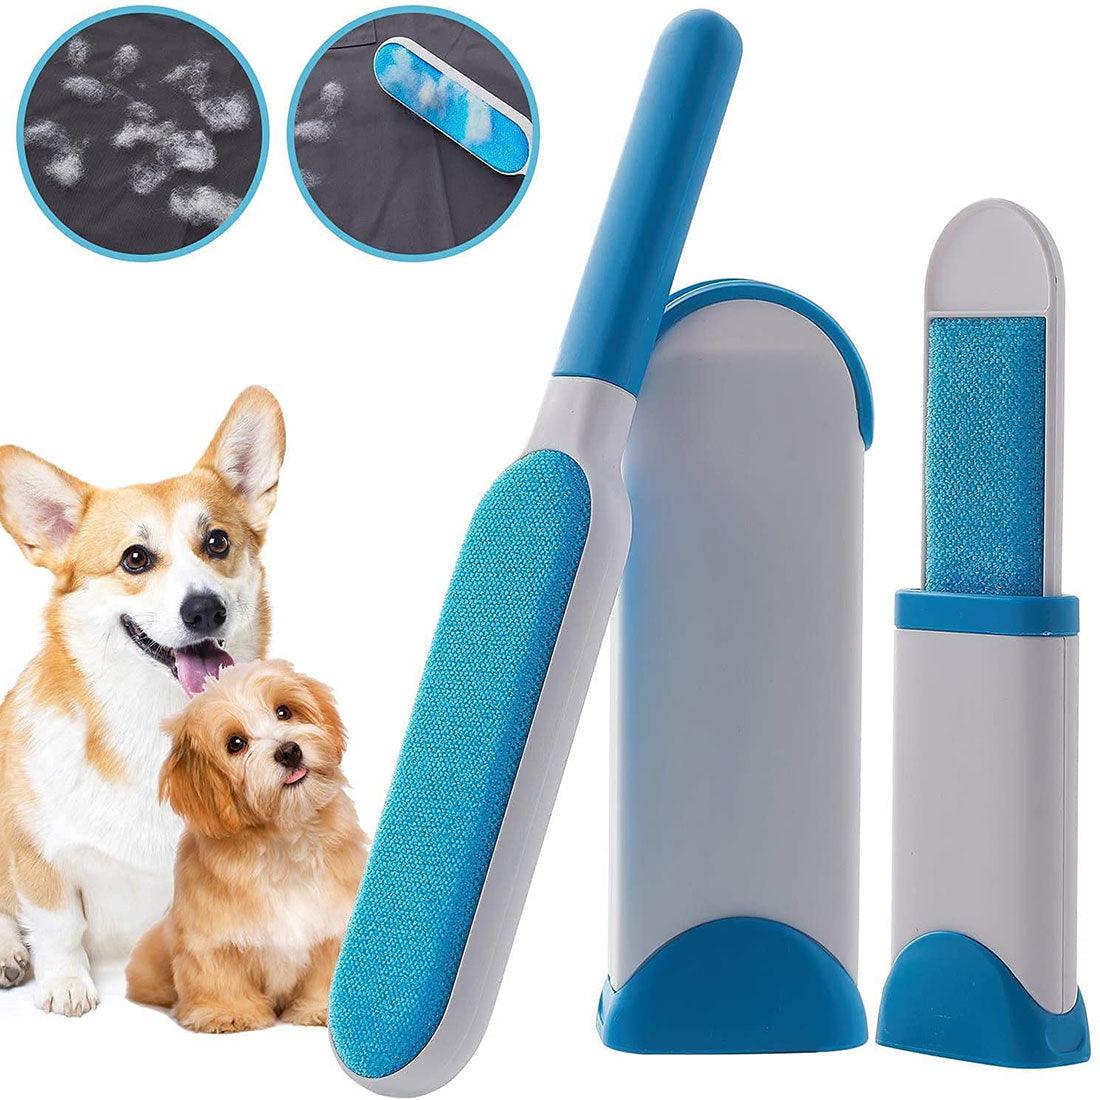 Lint and Pet Hair Remover Brush - TruVeli